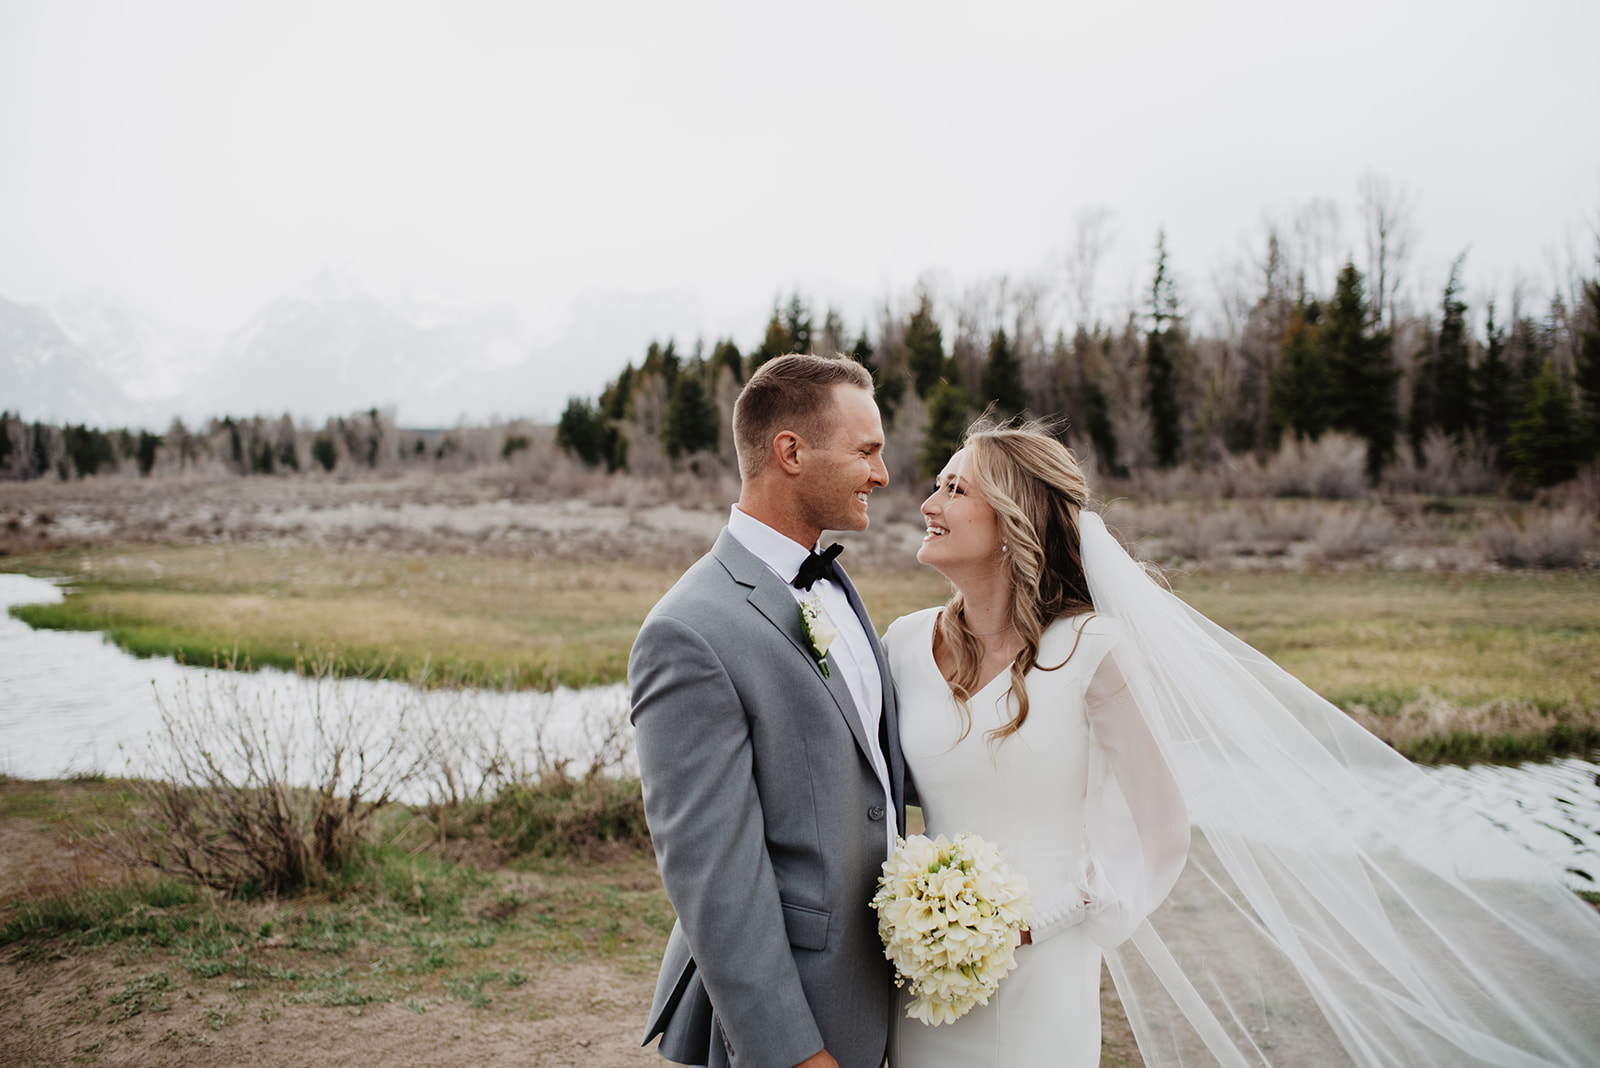 bride and groom on their foggy Jackson hole wedding day standing close together and smile while gazing at each other with the Tetons in the background through the thick fog